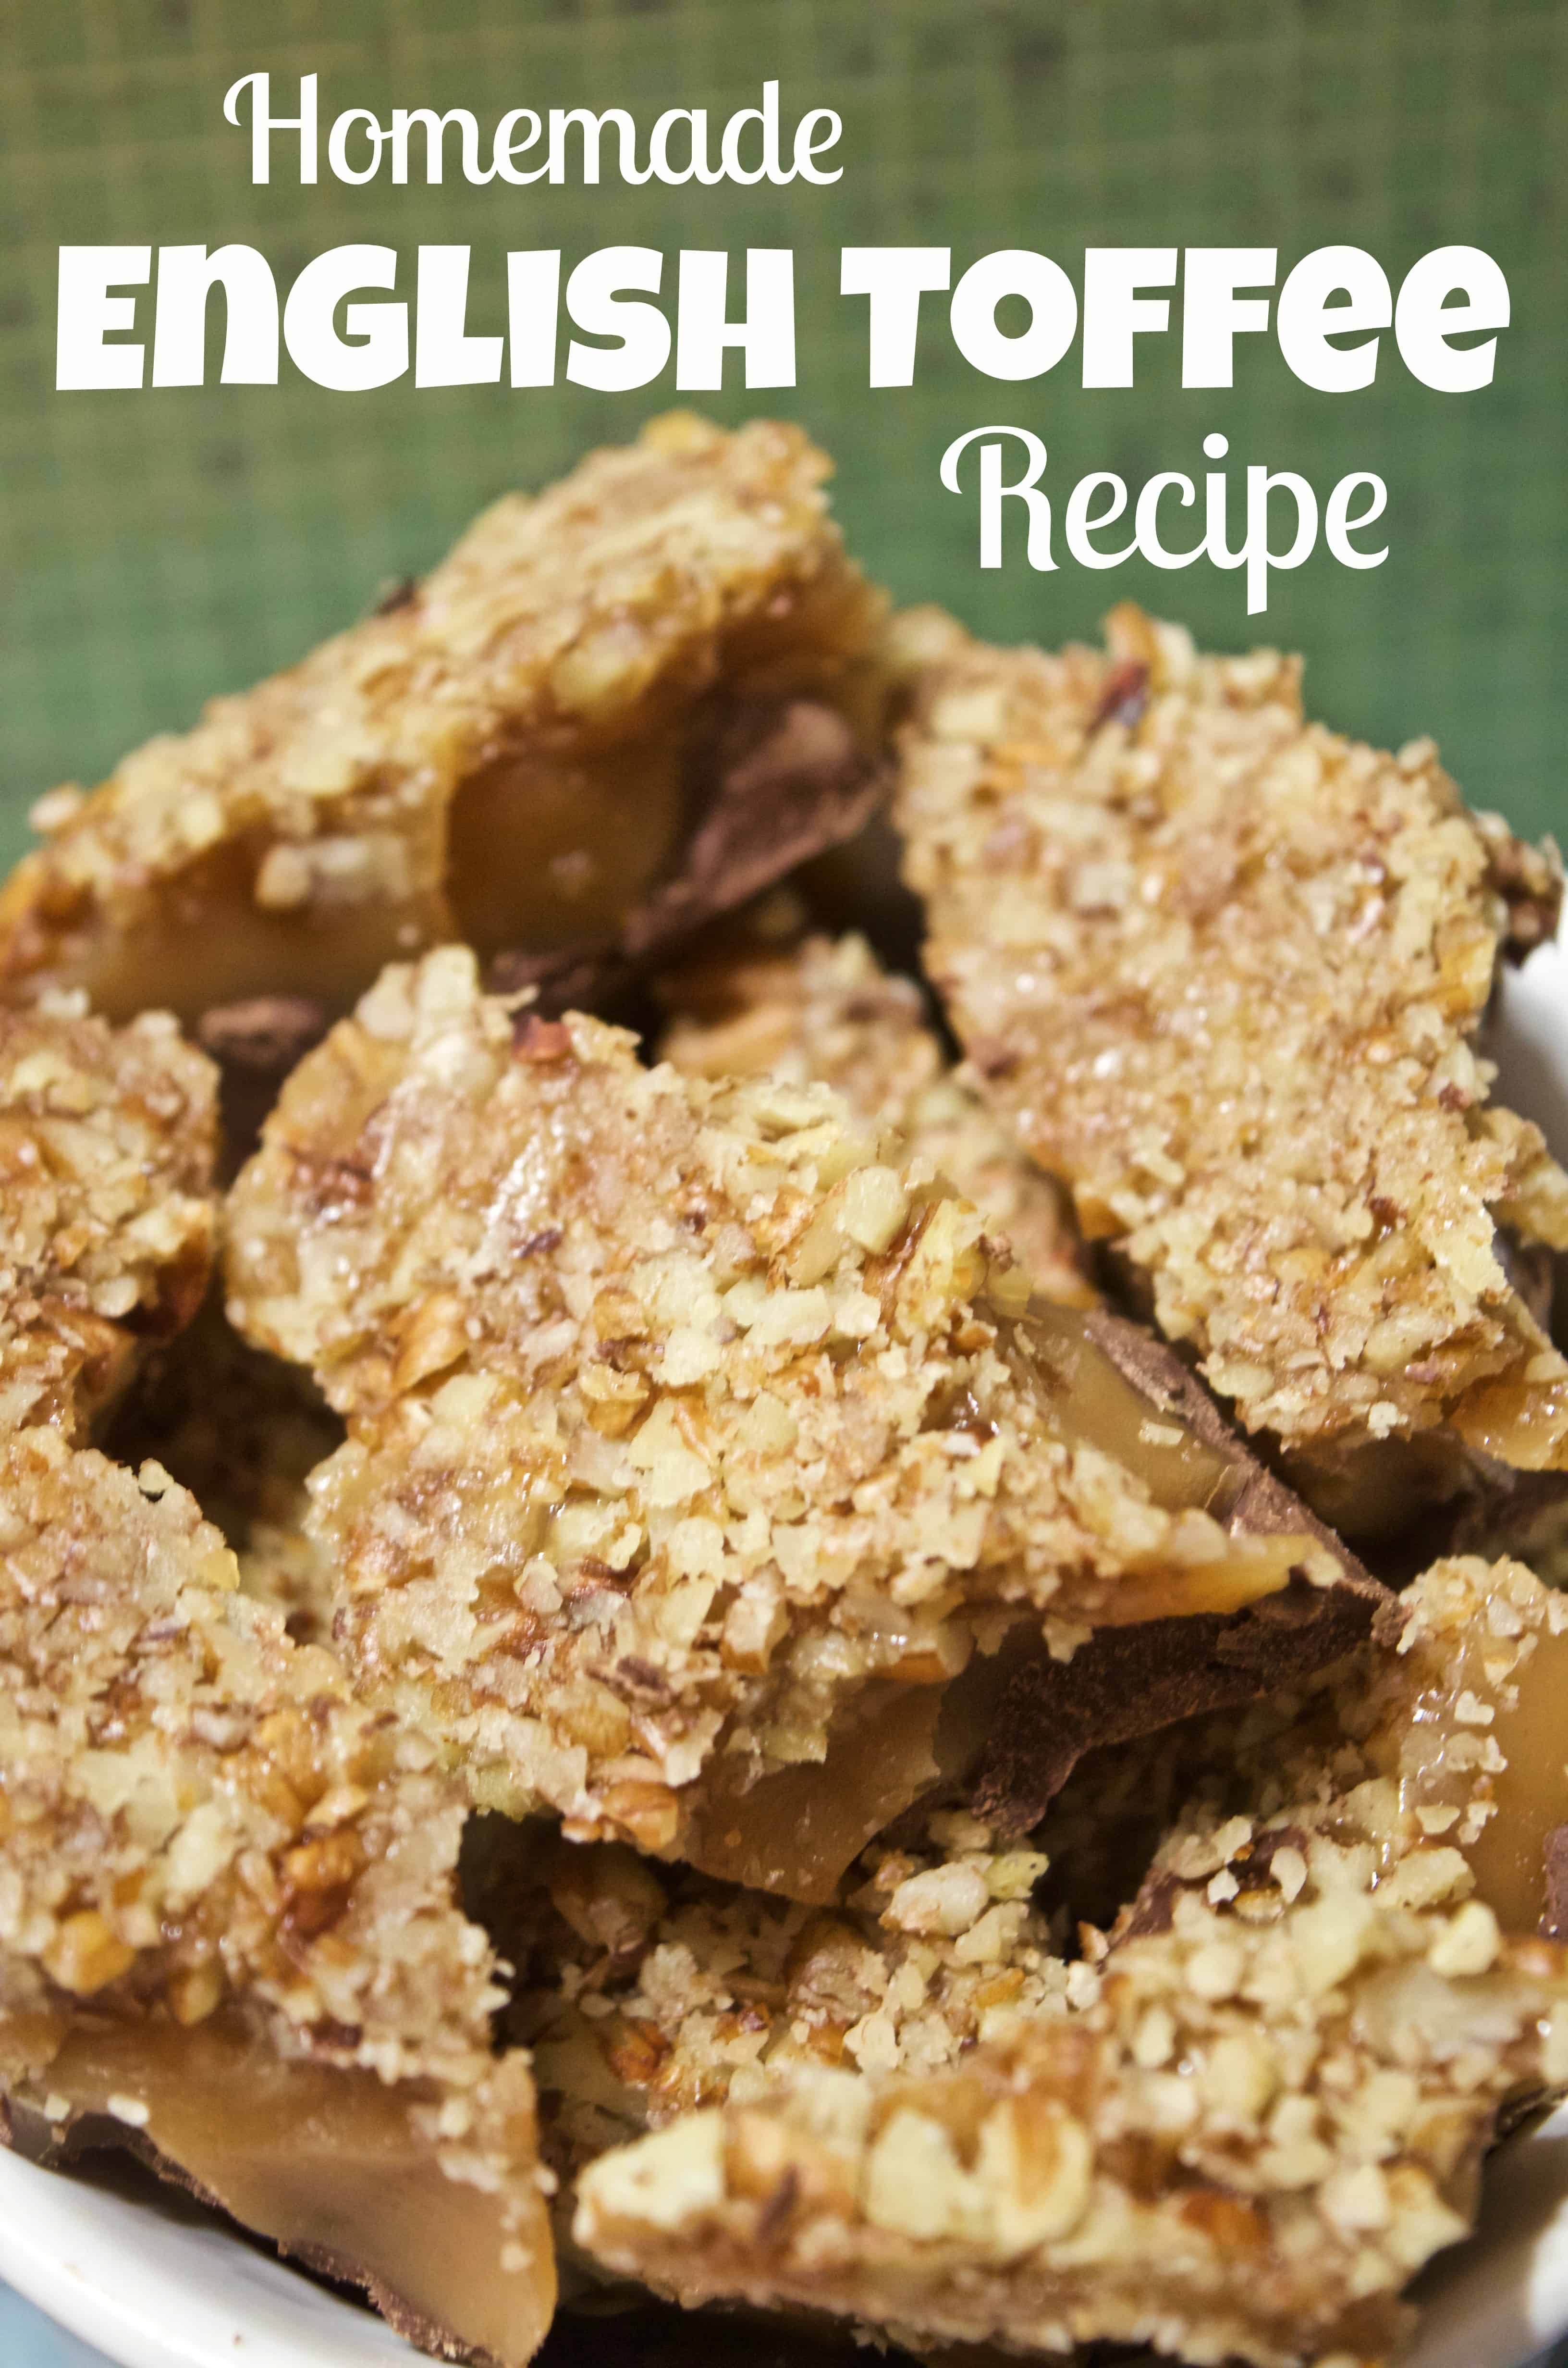 Simple Homemade English Toffee Candy Recipe Tutorial